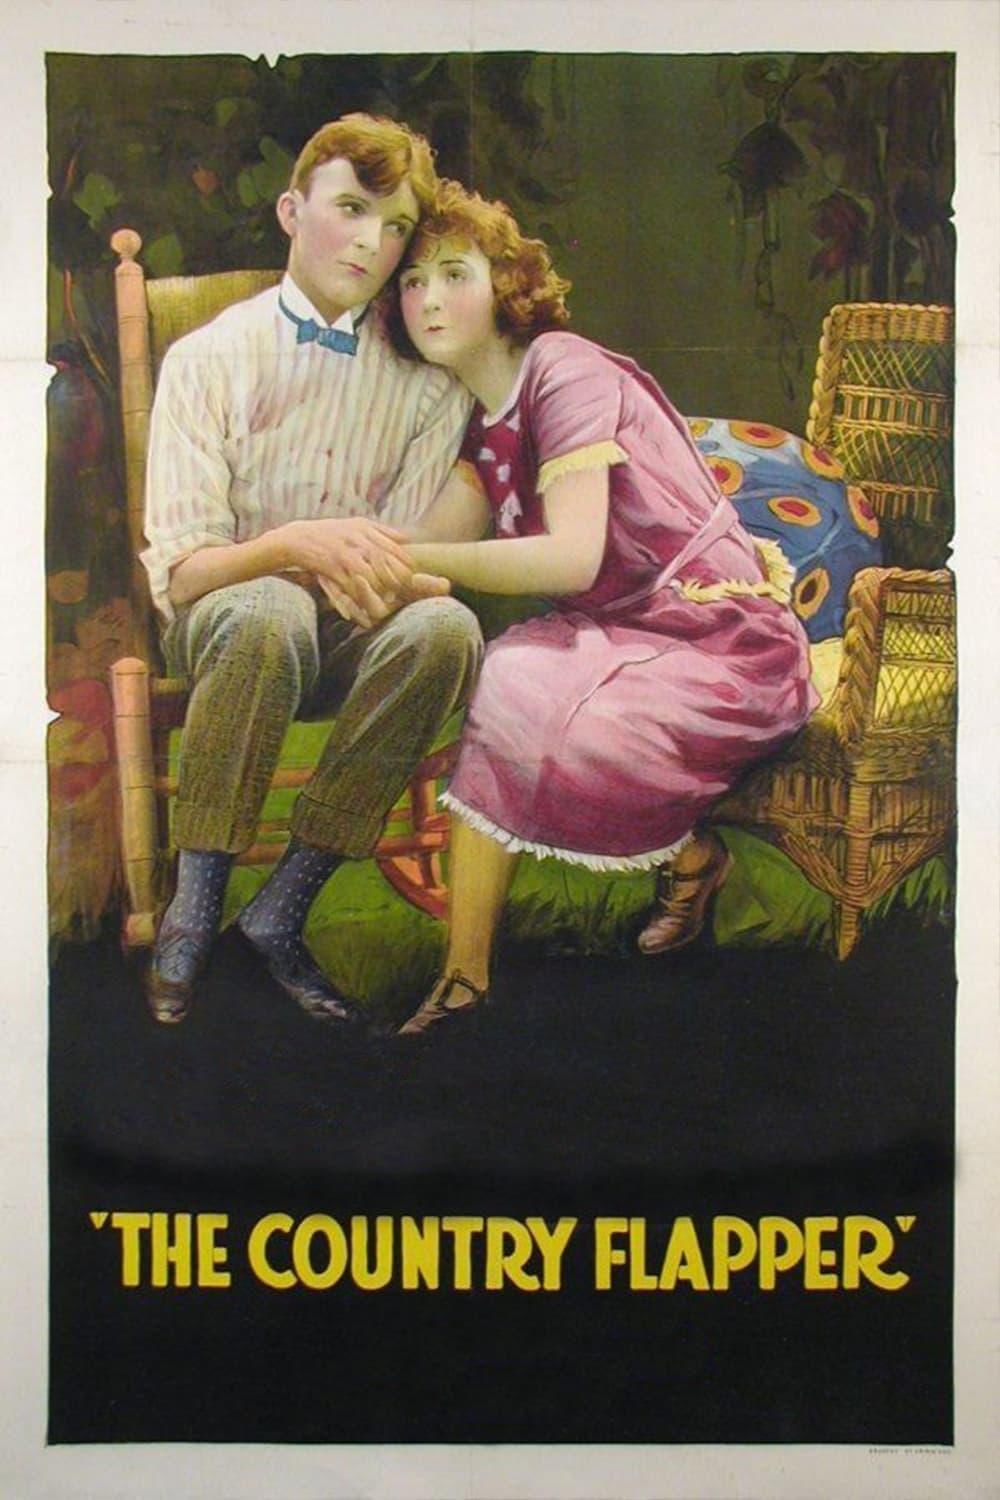 The Country Flapper poster